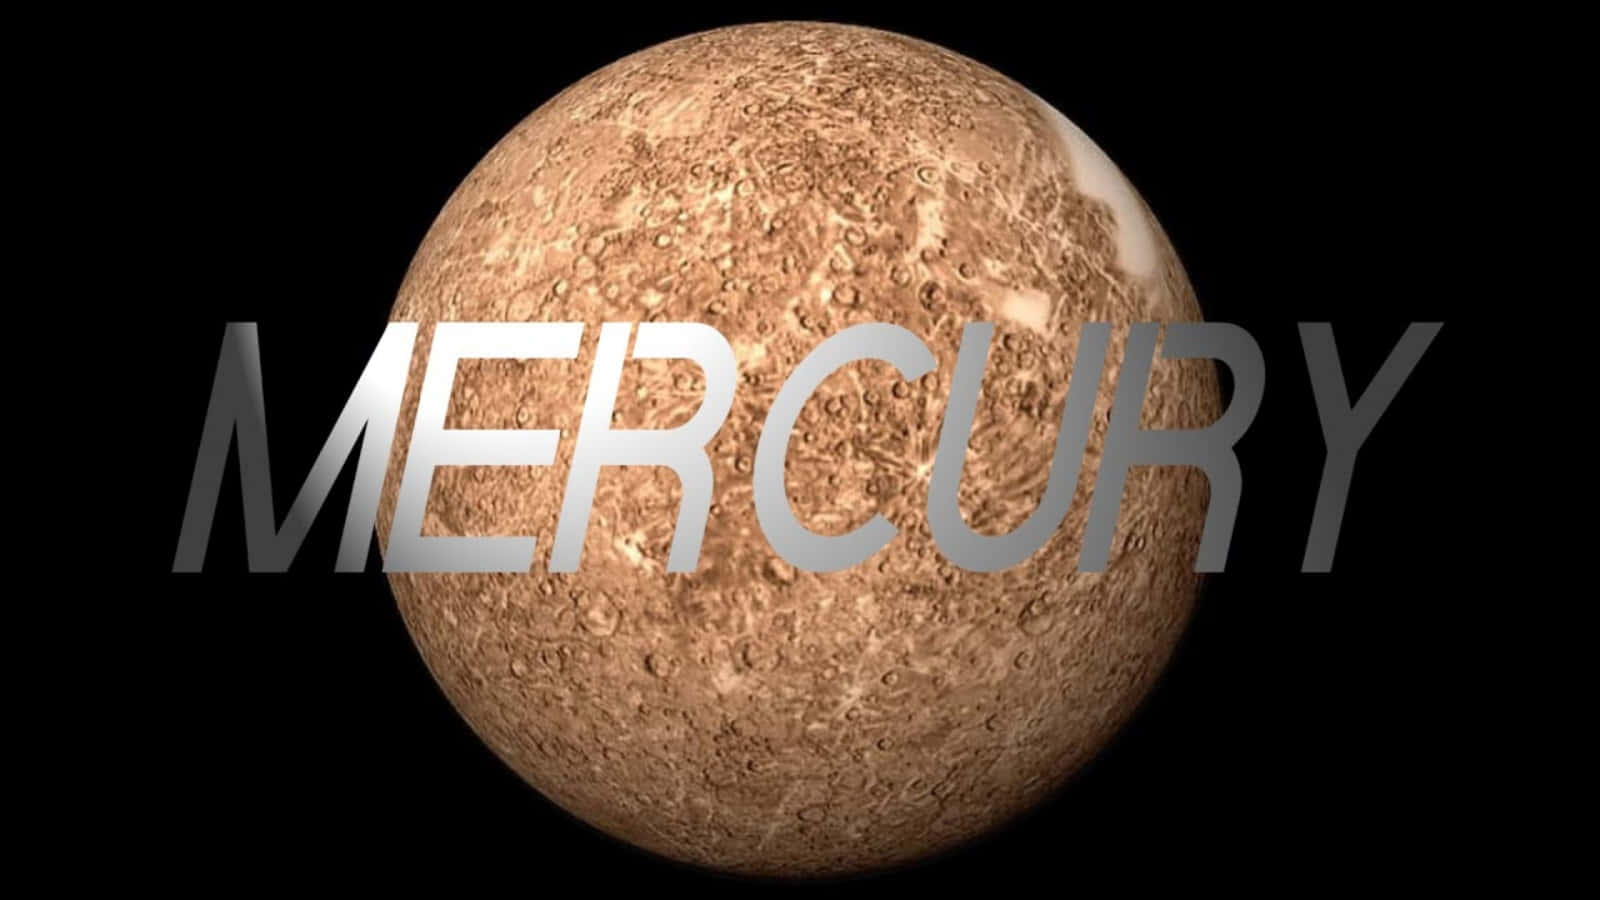 The Shiny Surface of the Planet Mercury